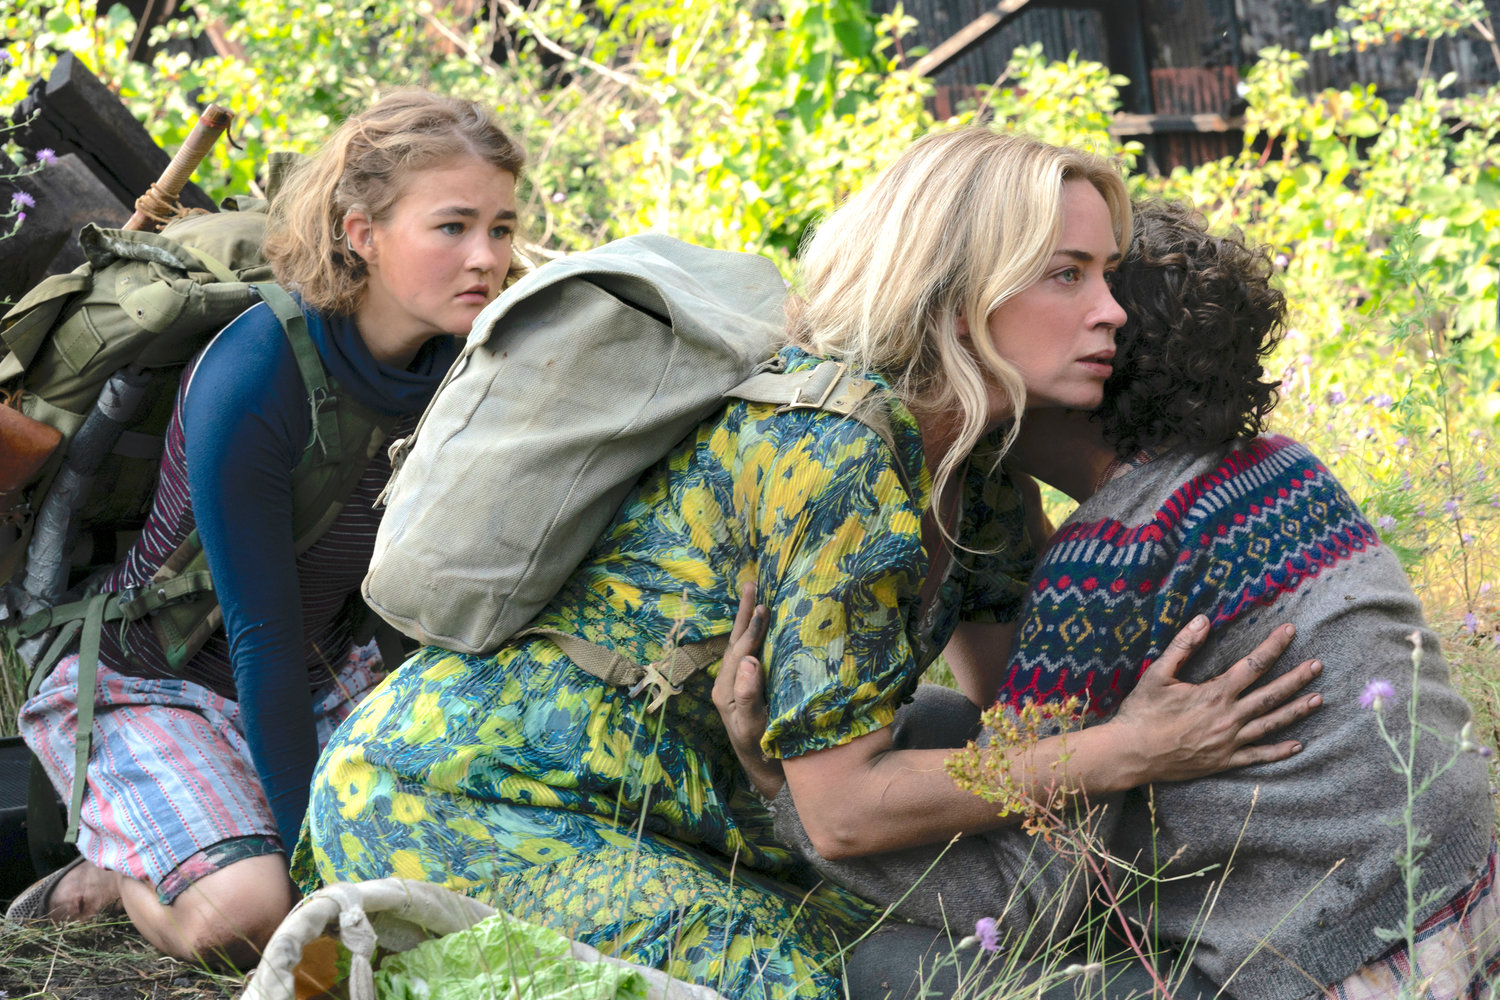 From left, Millicent Simmonds as Regan, Emily Blunt as Evelyn and Noah Jupe as Marcus in a scene from "A Quiet Place Part II."